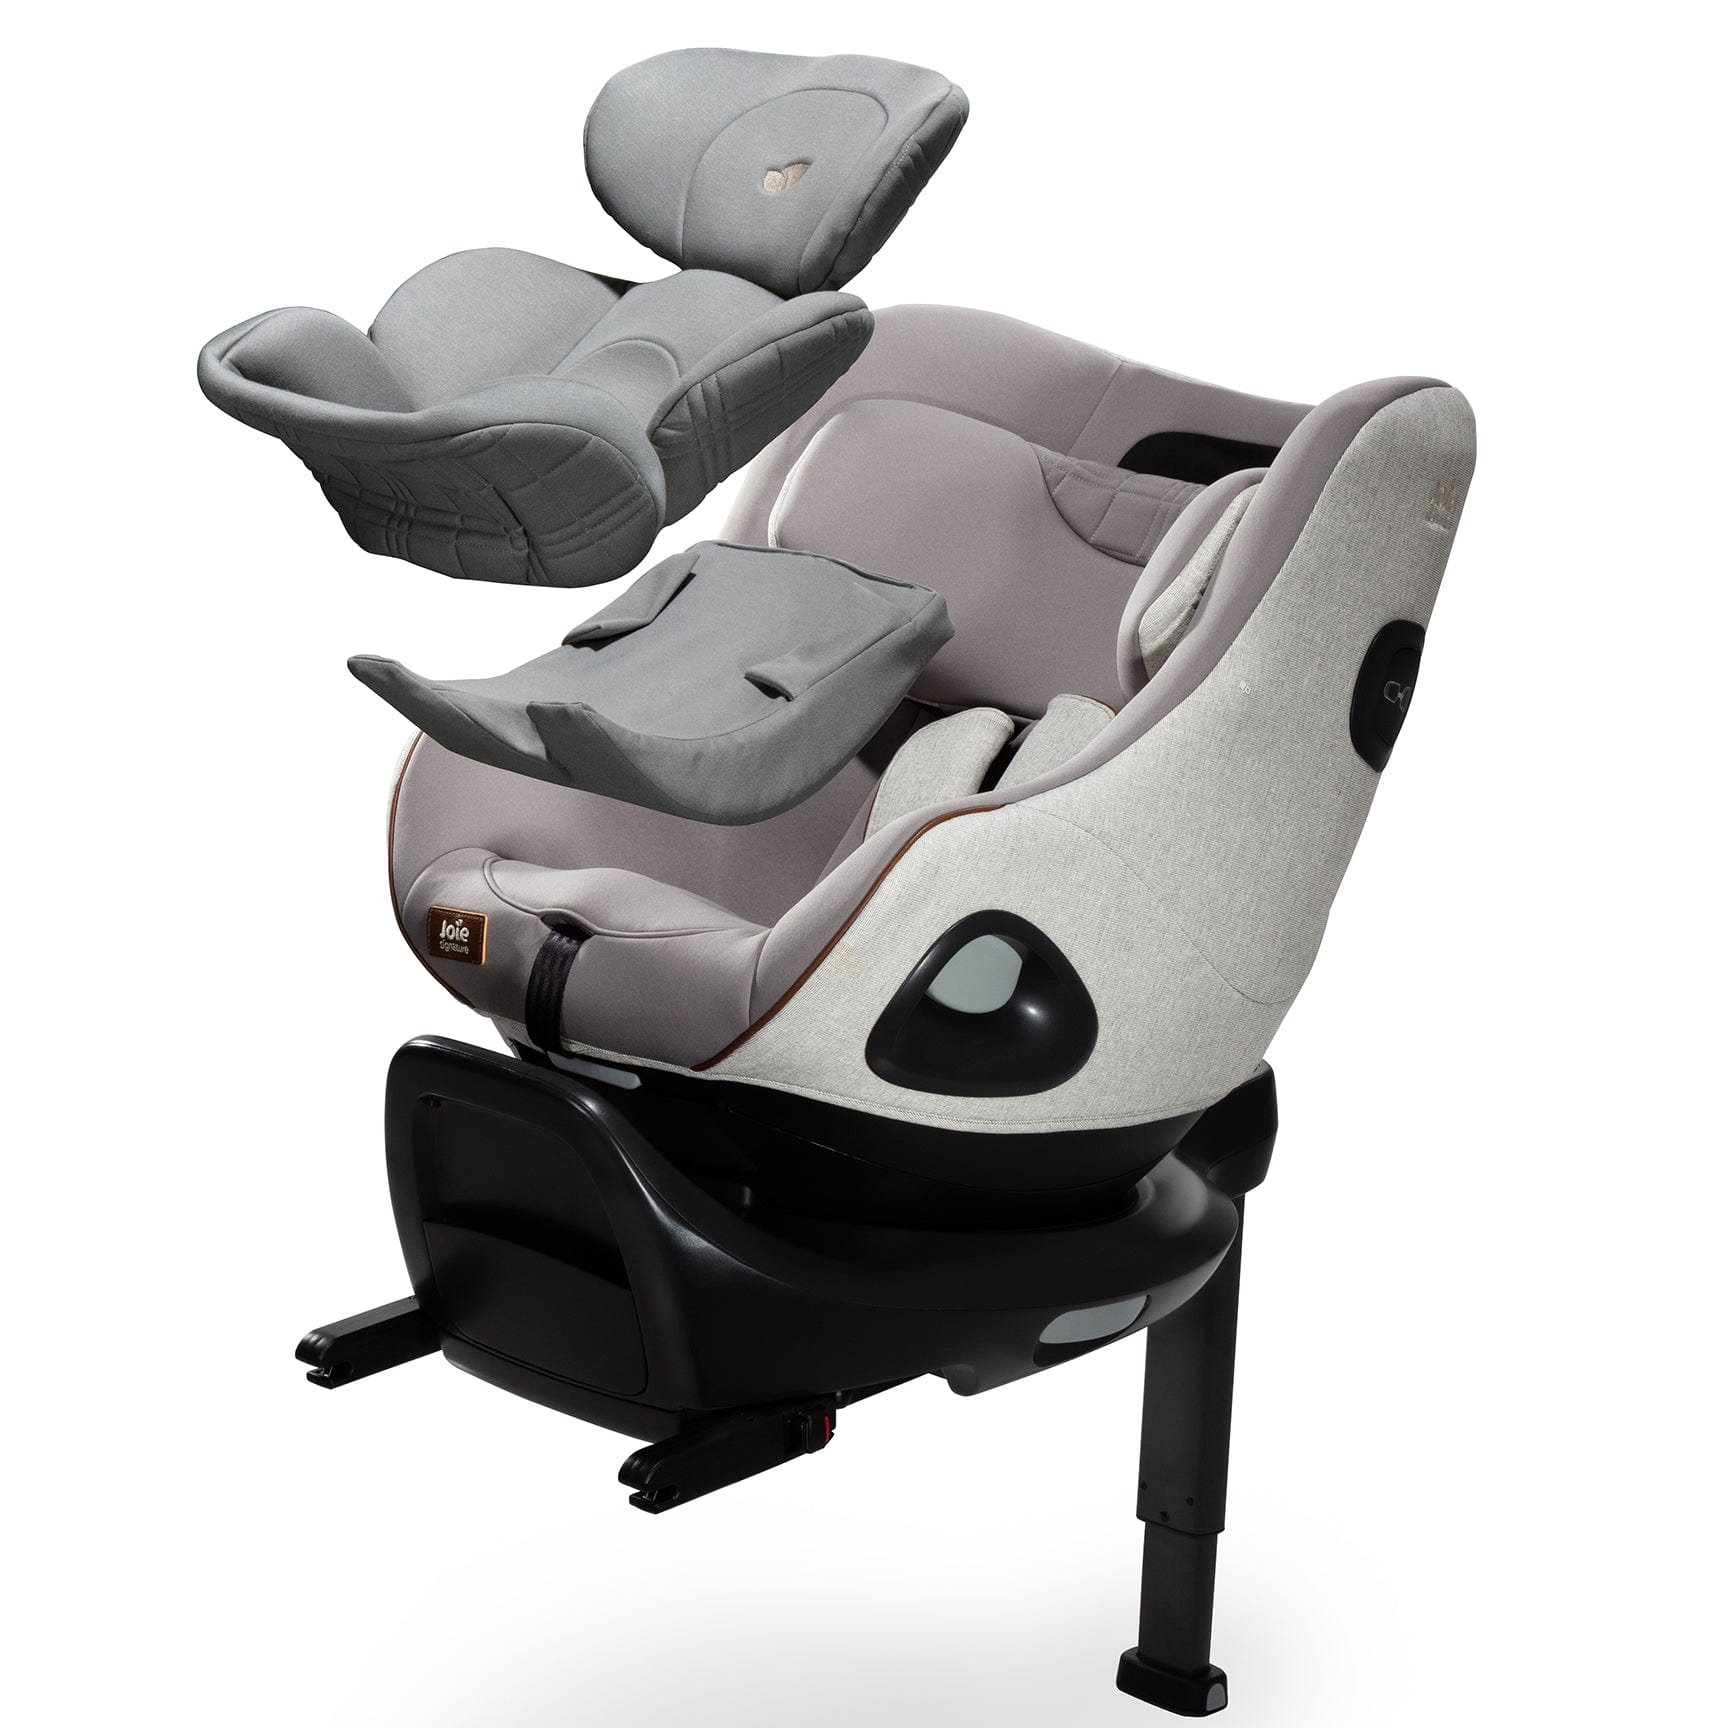 Joie i-Size car seats Joie i-Harbour - Oyster C214AAOYS000